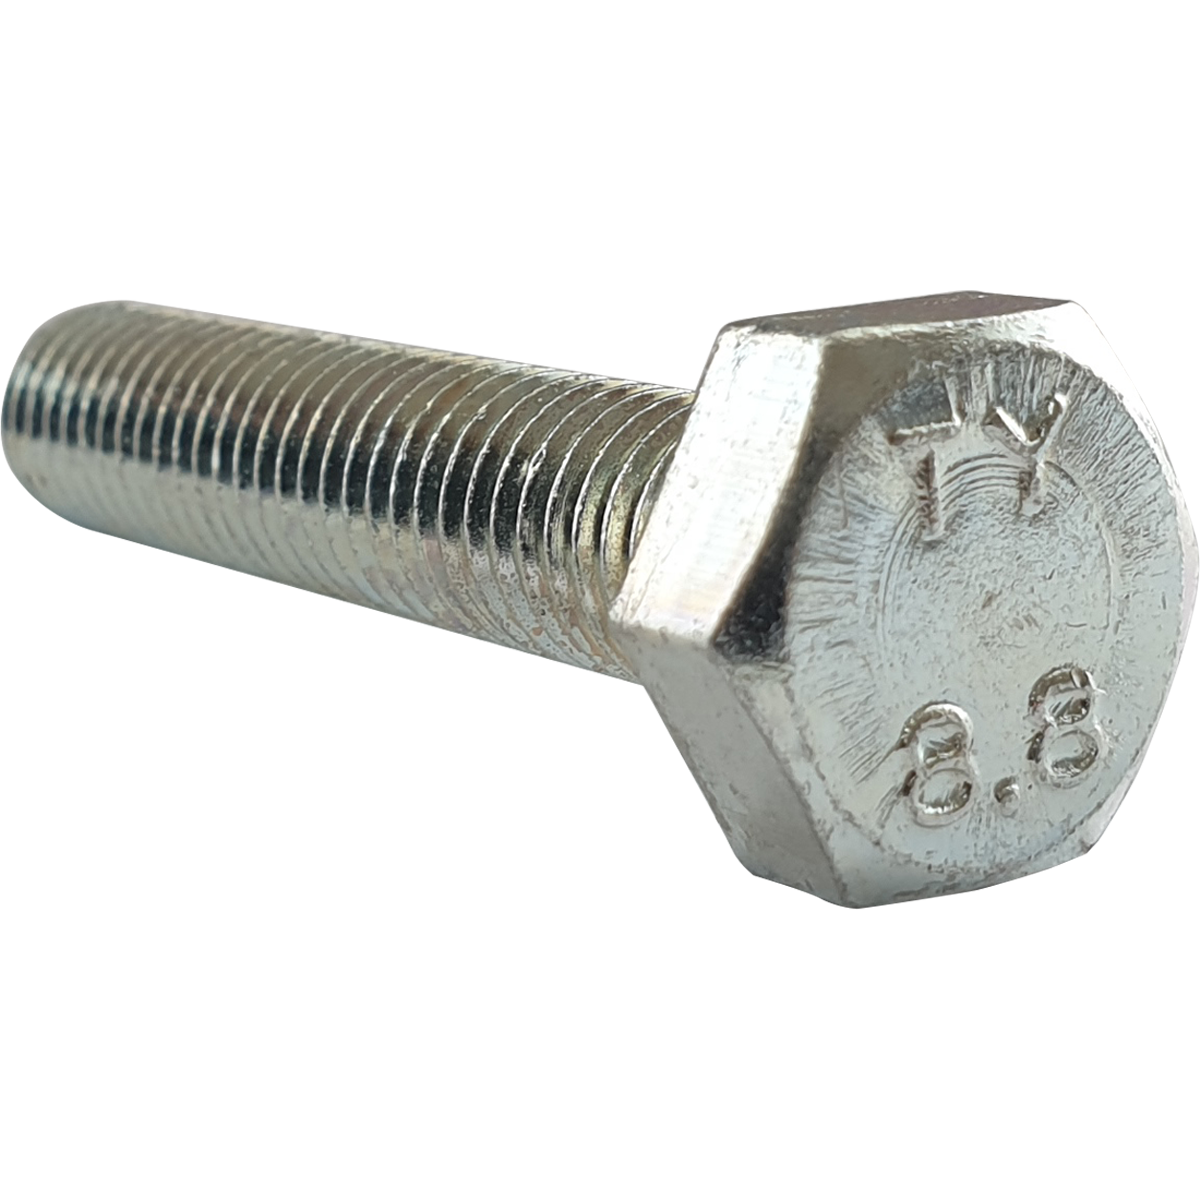 Metric fine, zinc plated, fully threaded hexagon set screw available in a selection of sizes.